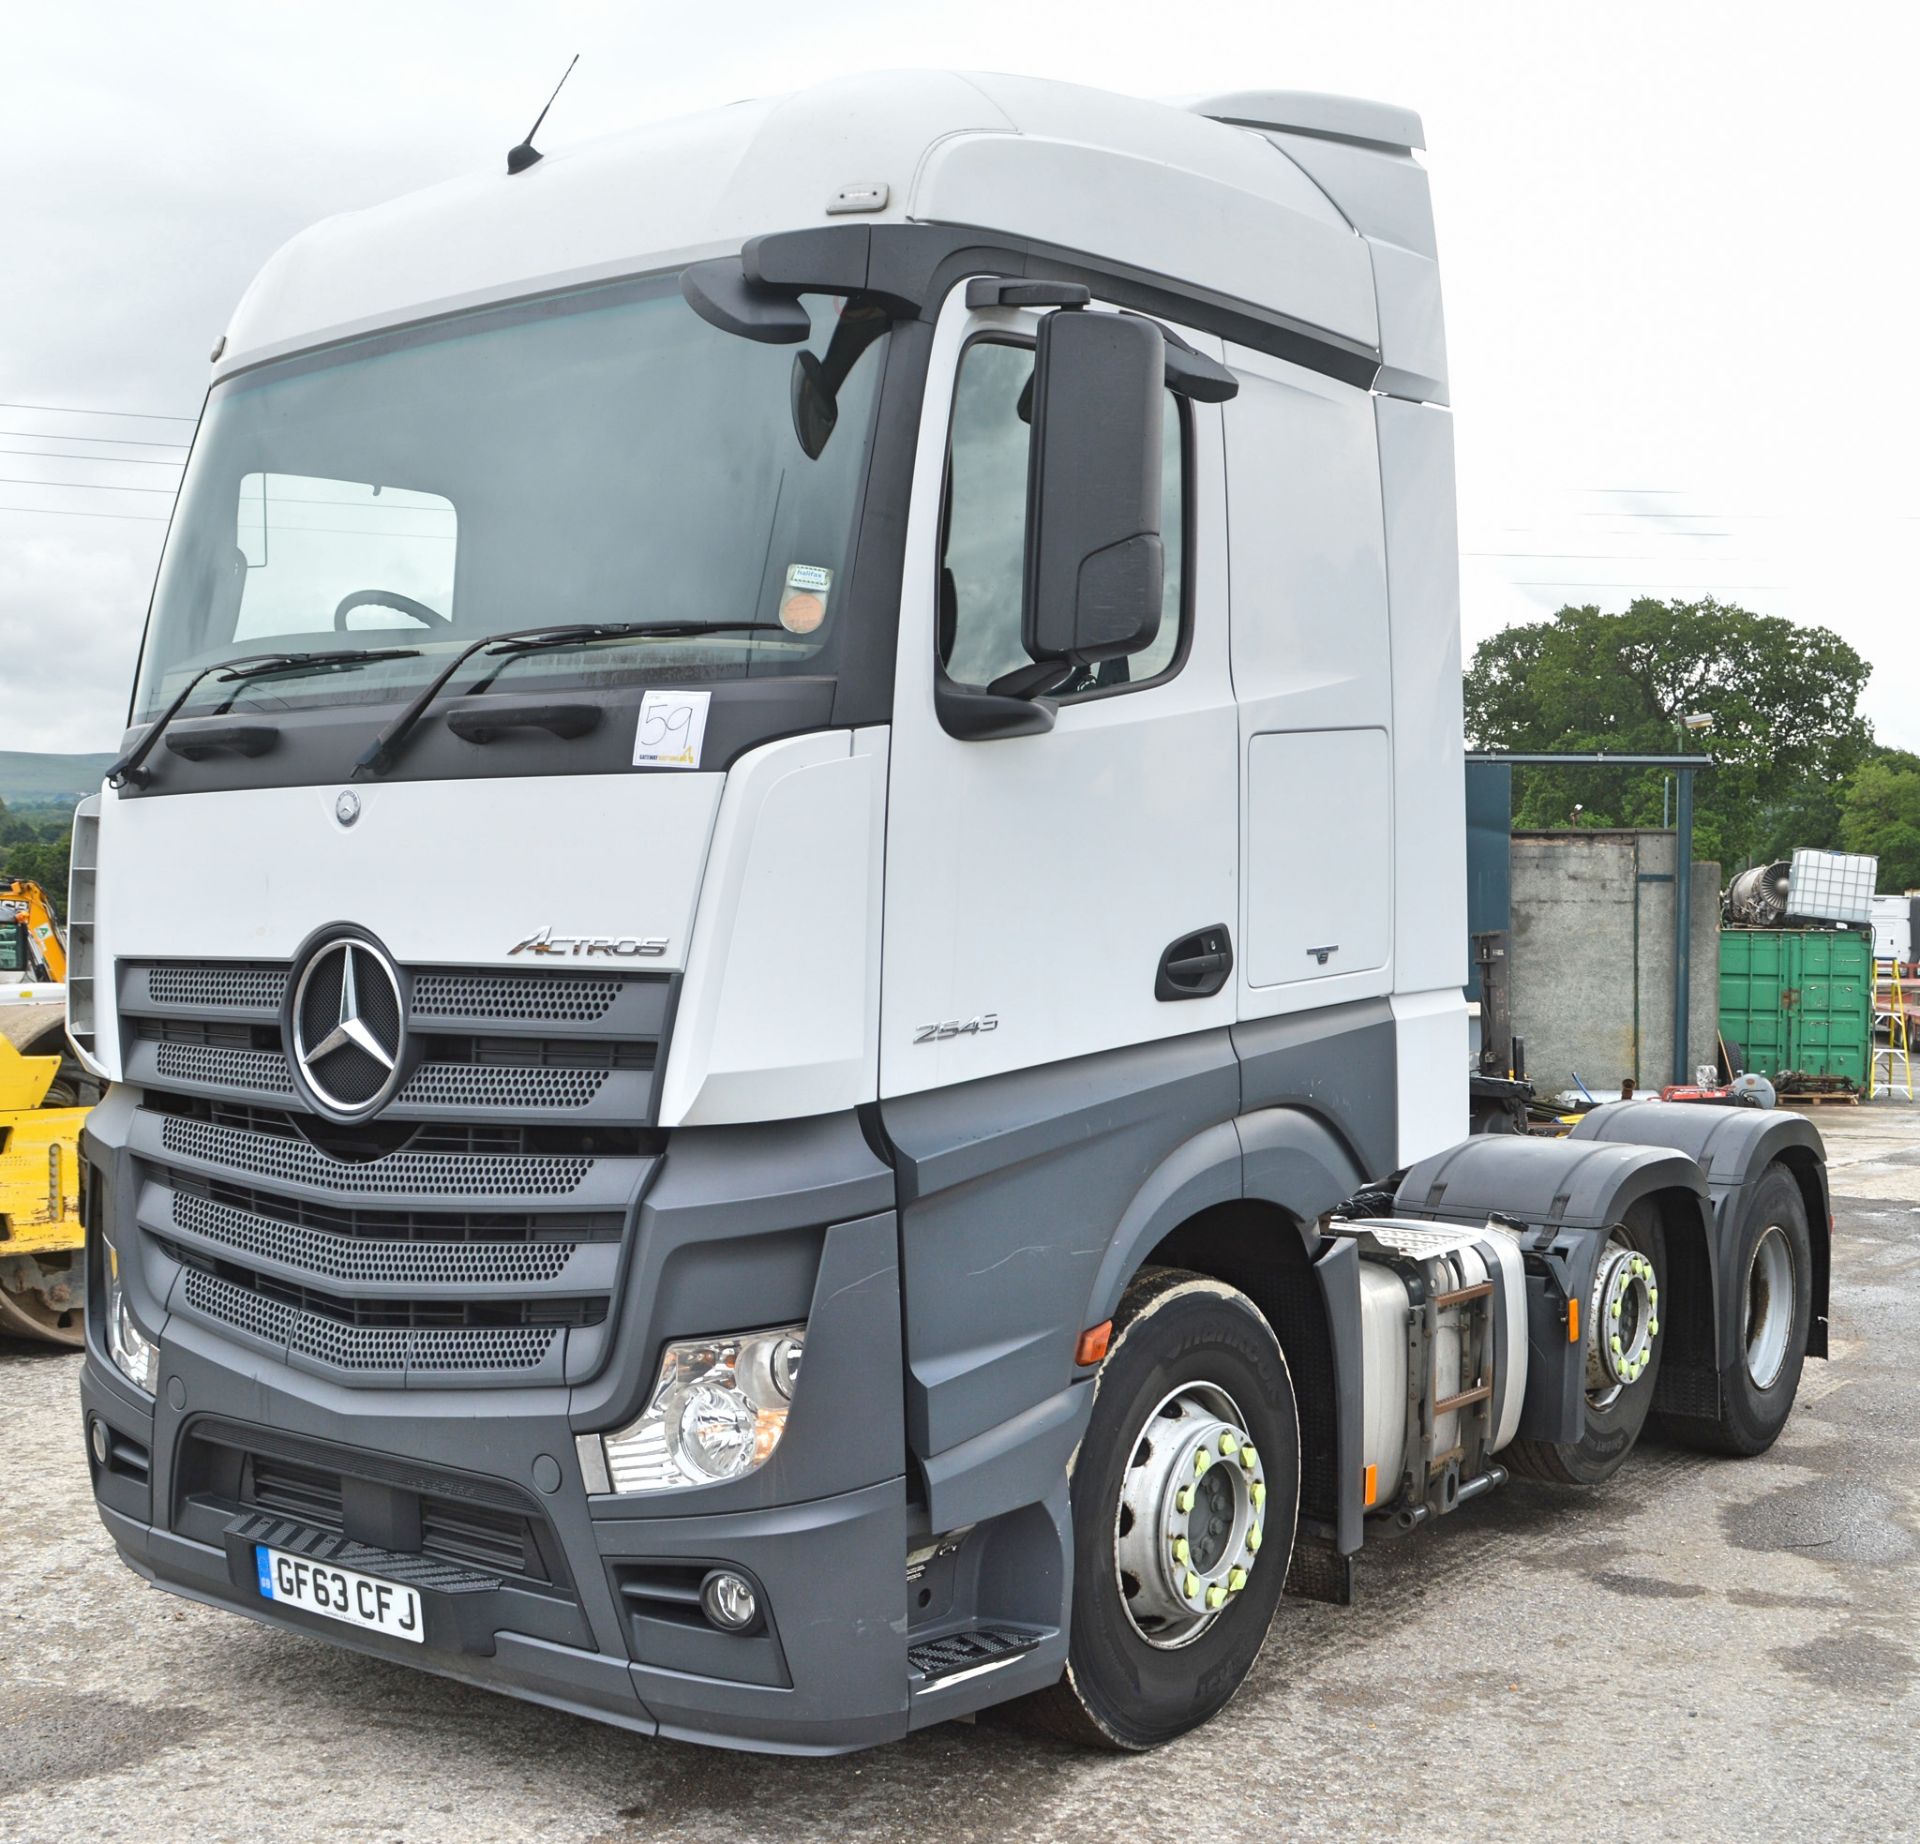 Mercedes Benz Actros 2545 6x2 mid lift tractor unit  Registration Number: GF63 CFS Recorded Miles: